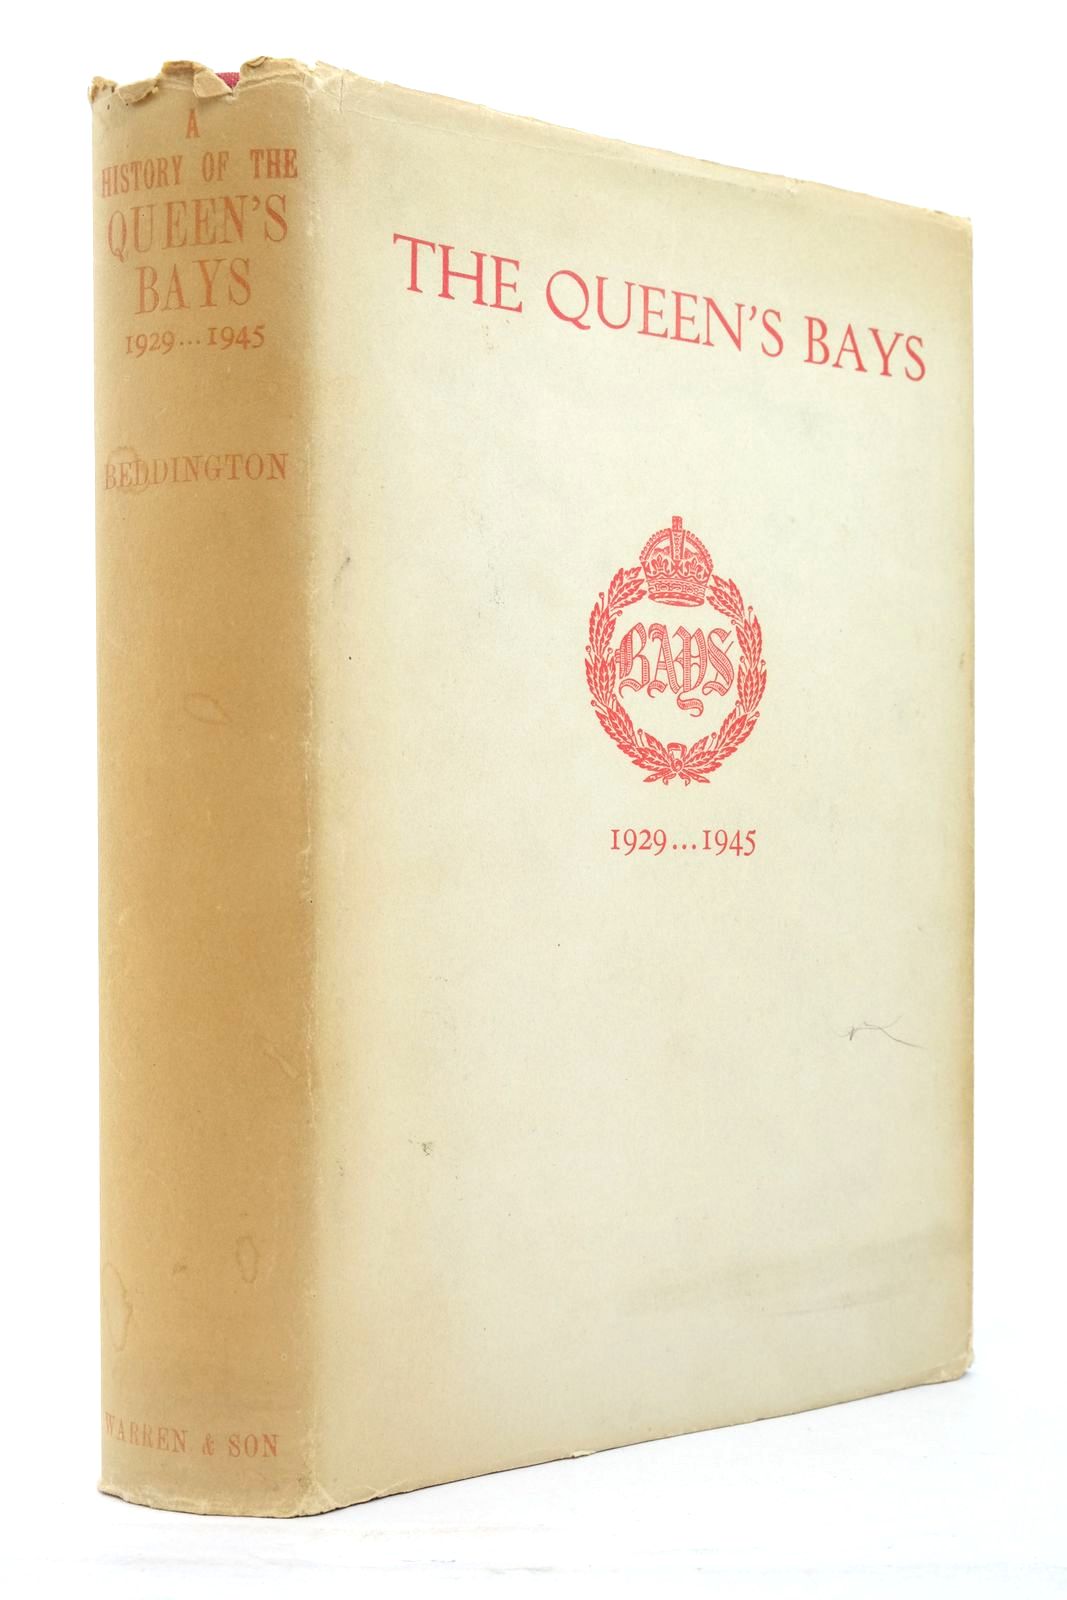 Photo of A HISTORY OF THE QUEEN'S BAYS (THE 2ND DRAGOON GUARDS) 1929...1945- Stock Number: 2137732